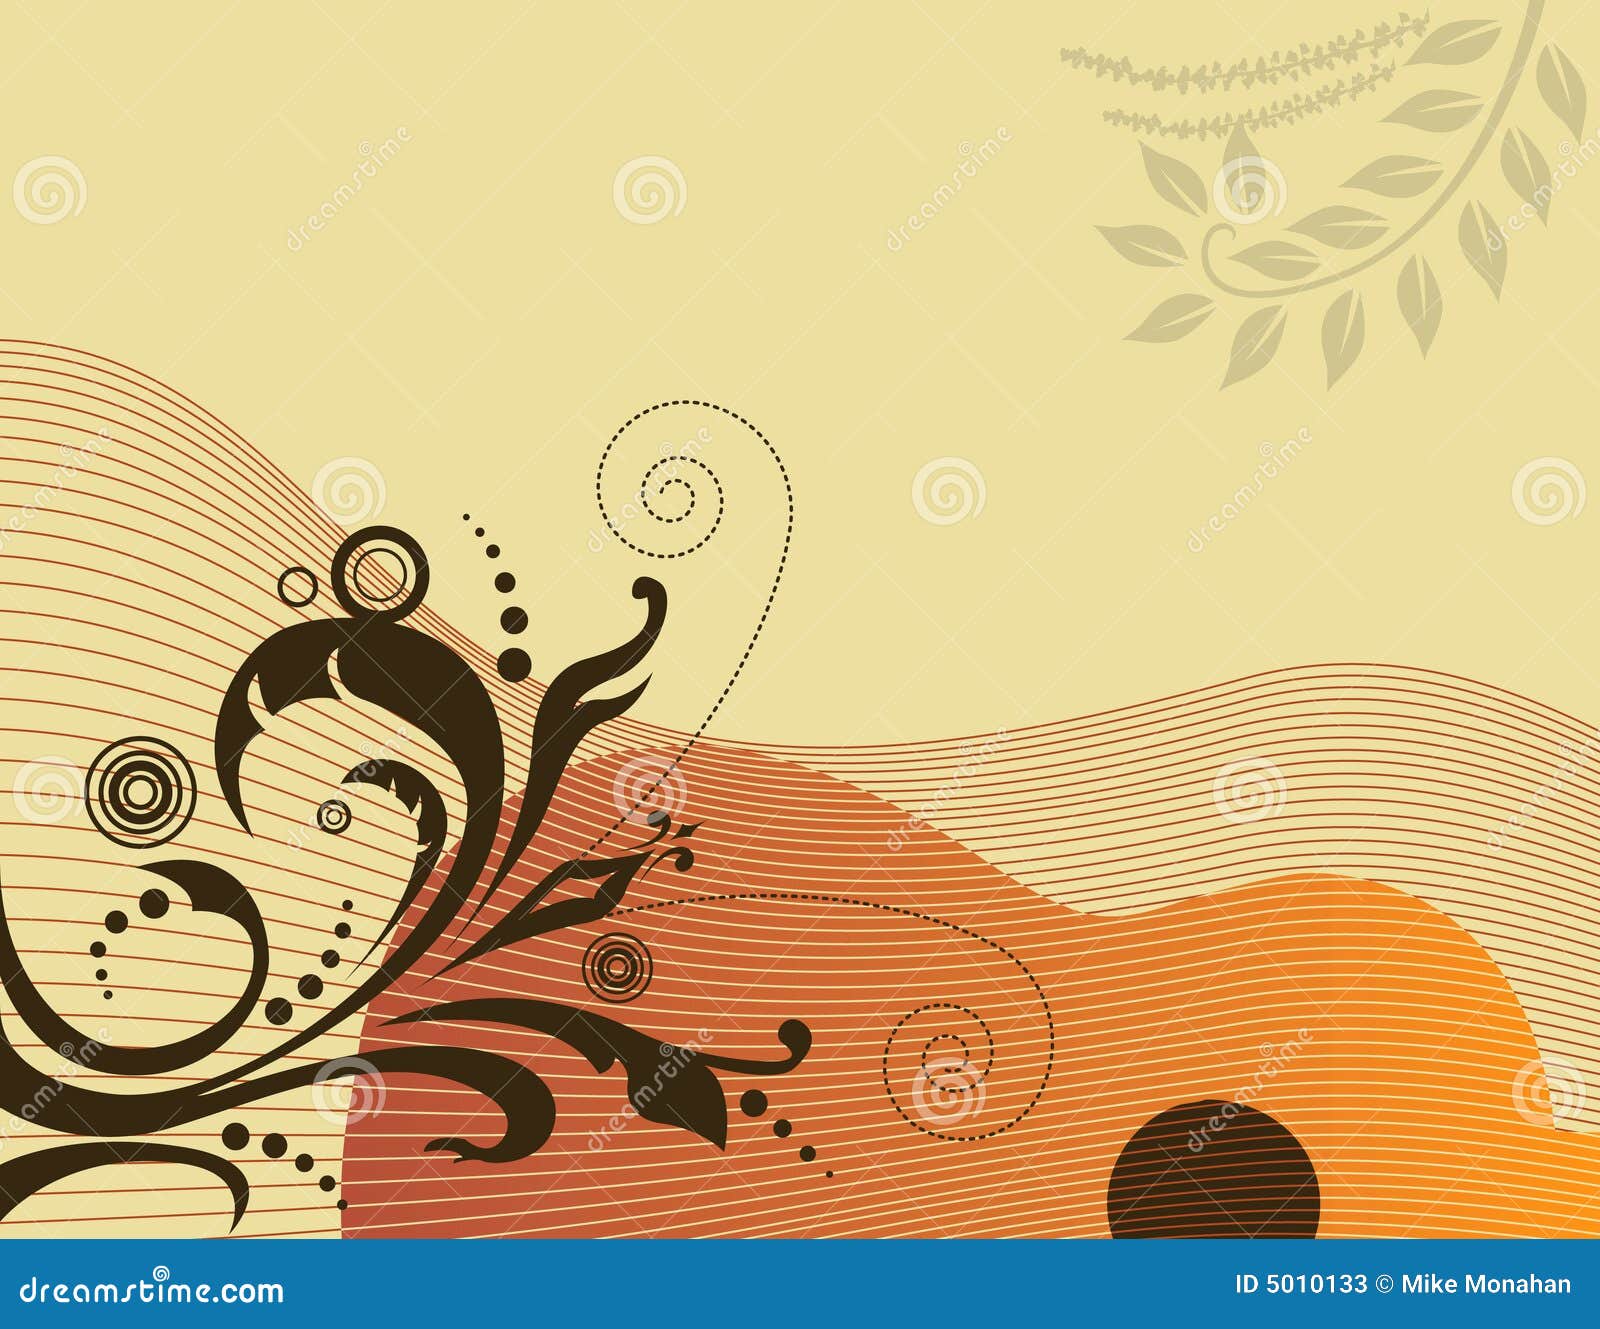 Acoustic guitar background stock vector. Illustration of vector - 5010133